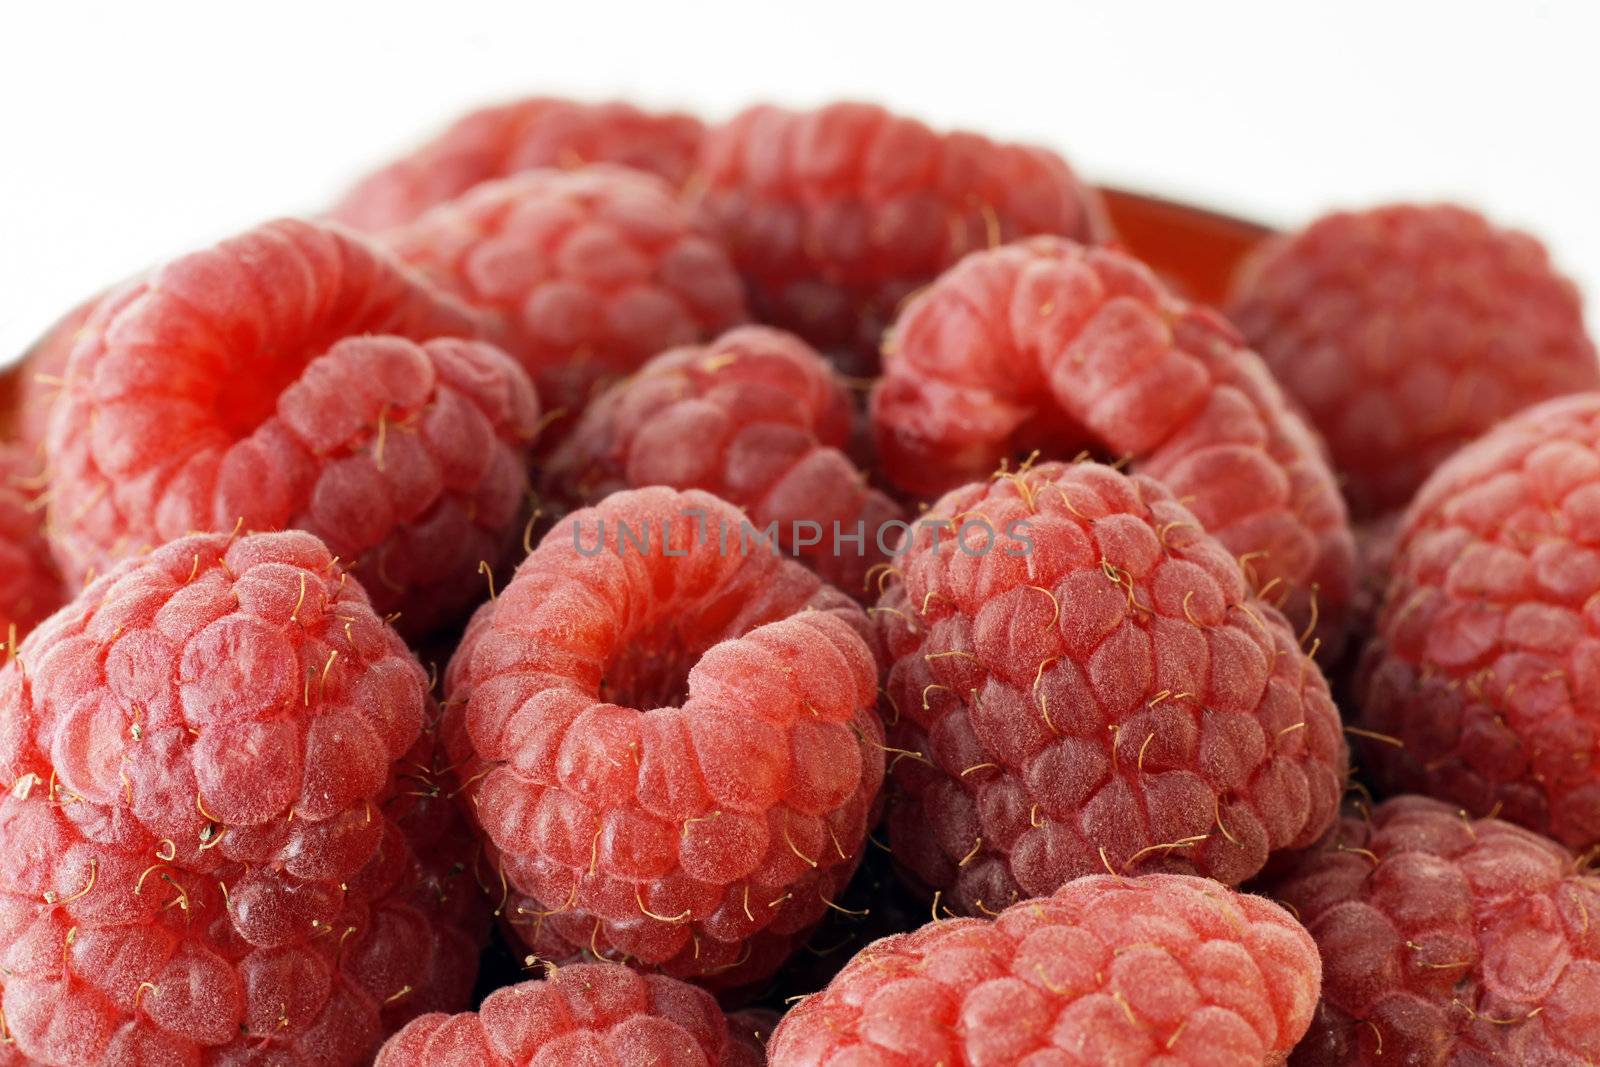 Raspberries up close by Mirage3